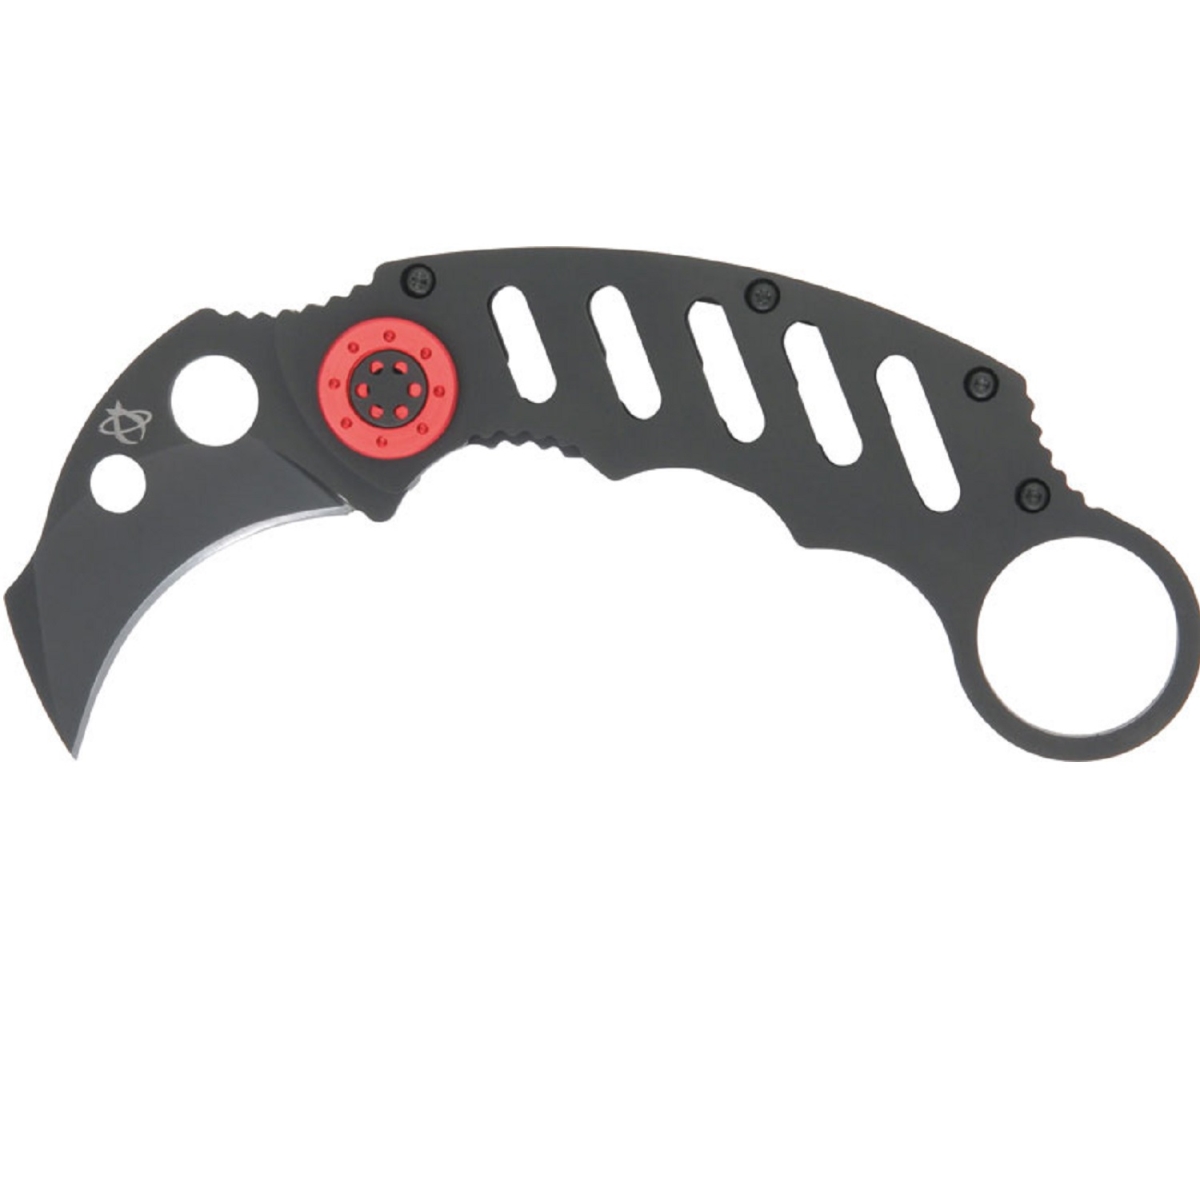 4019454 2 In. Mk1 Cing Karambit Knife Blade With Stainless Handle